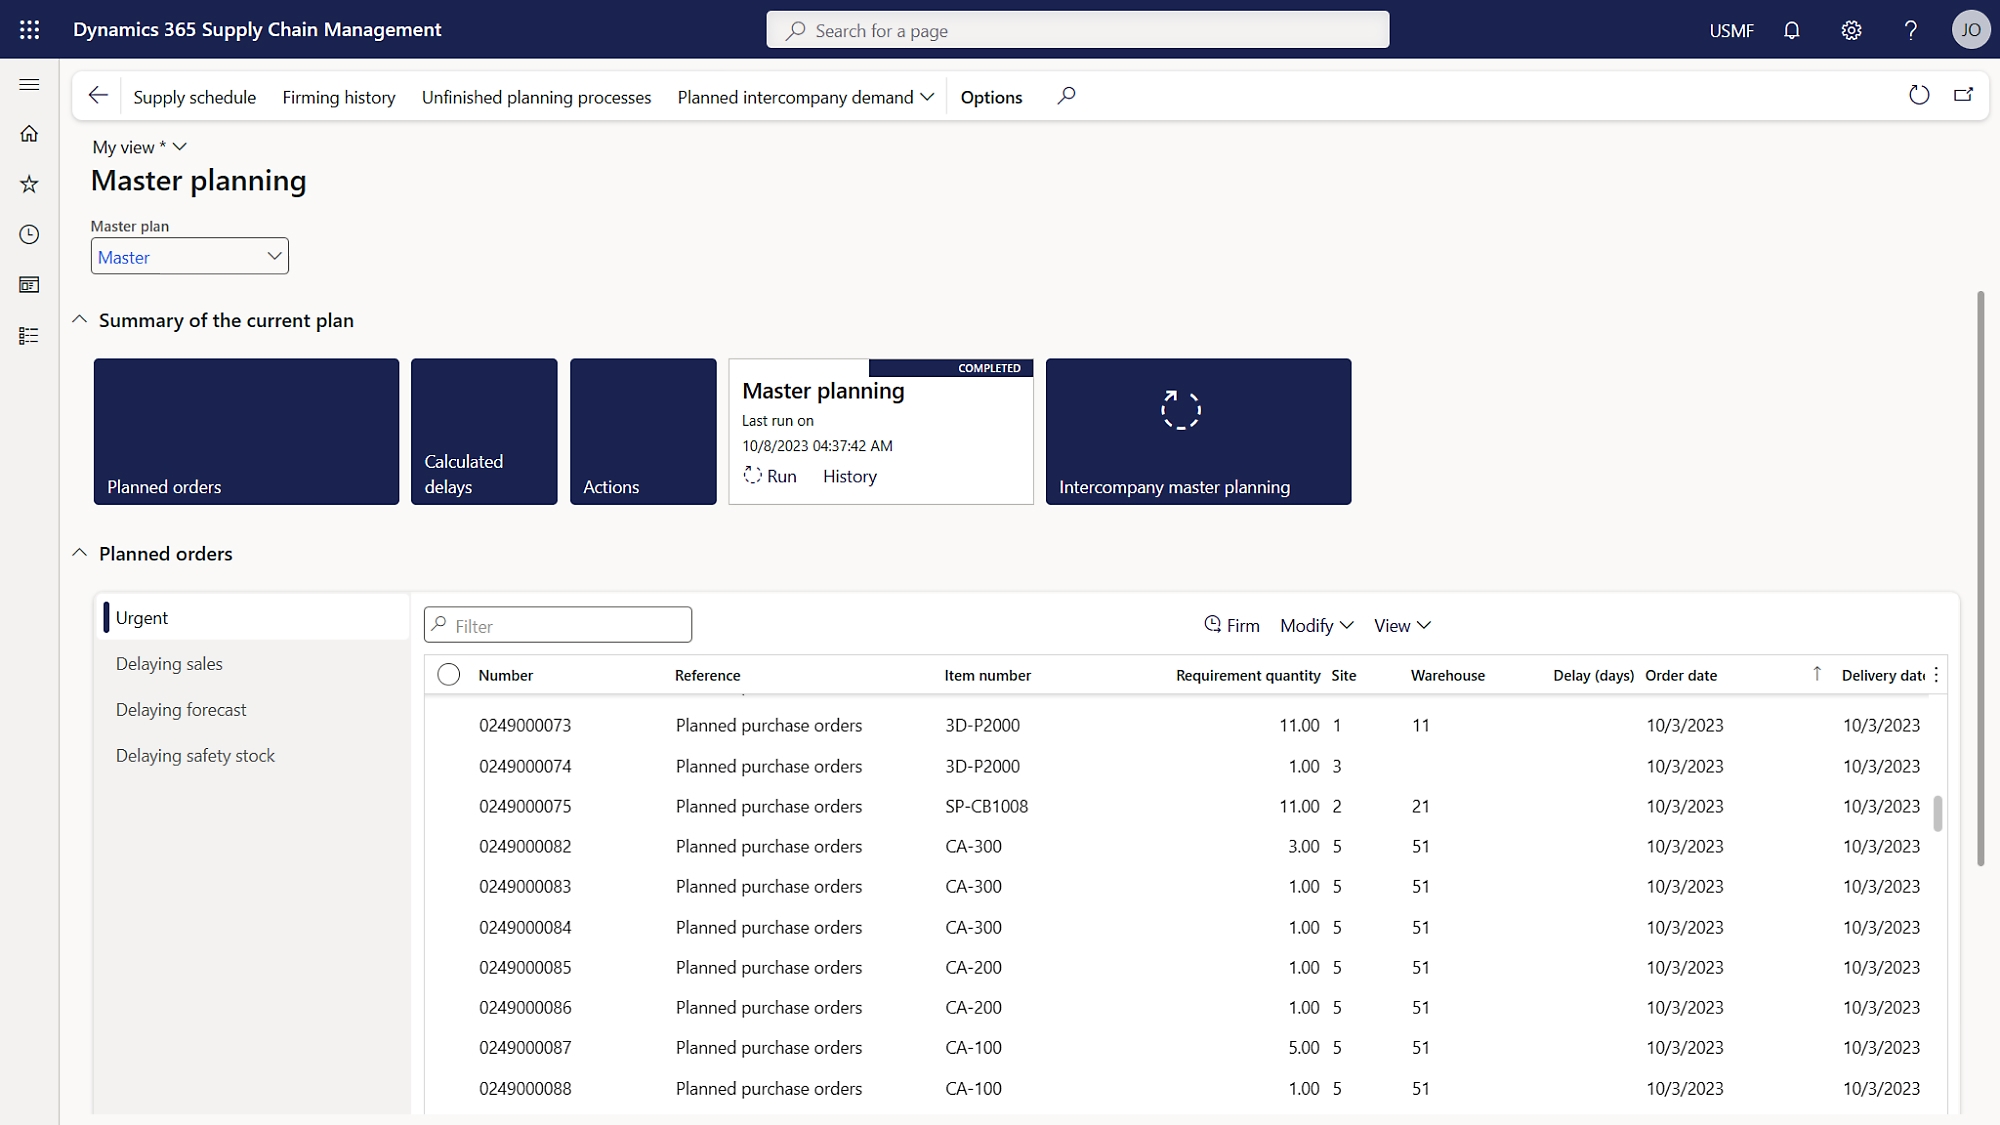 A screen shot of a business intelligence dashboard showing data in row format.